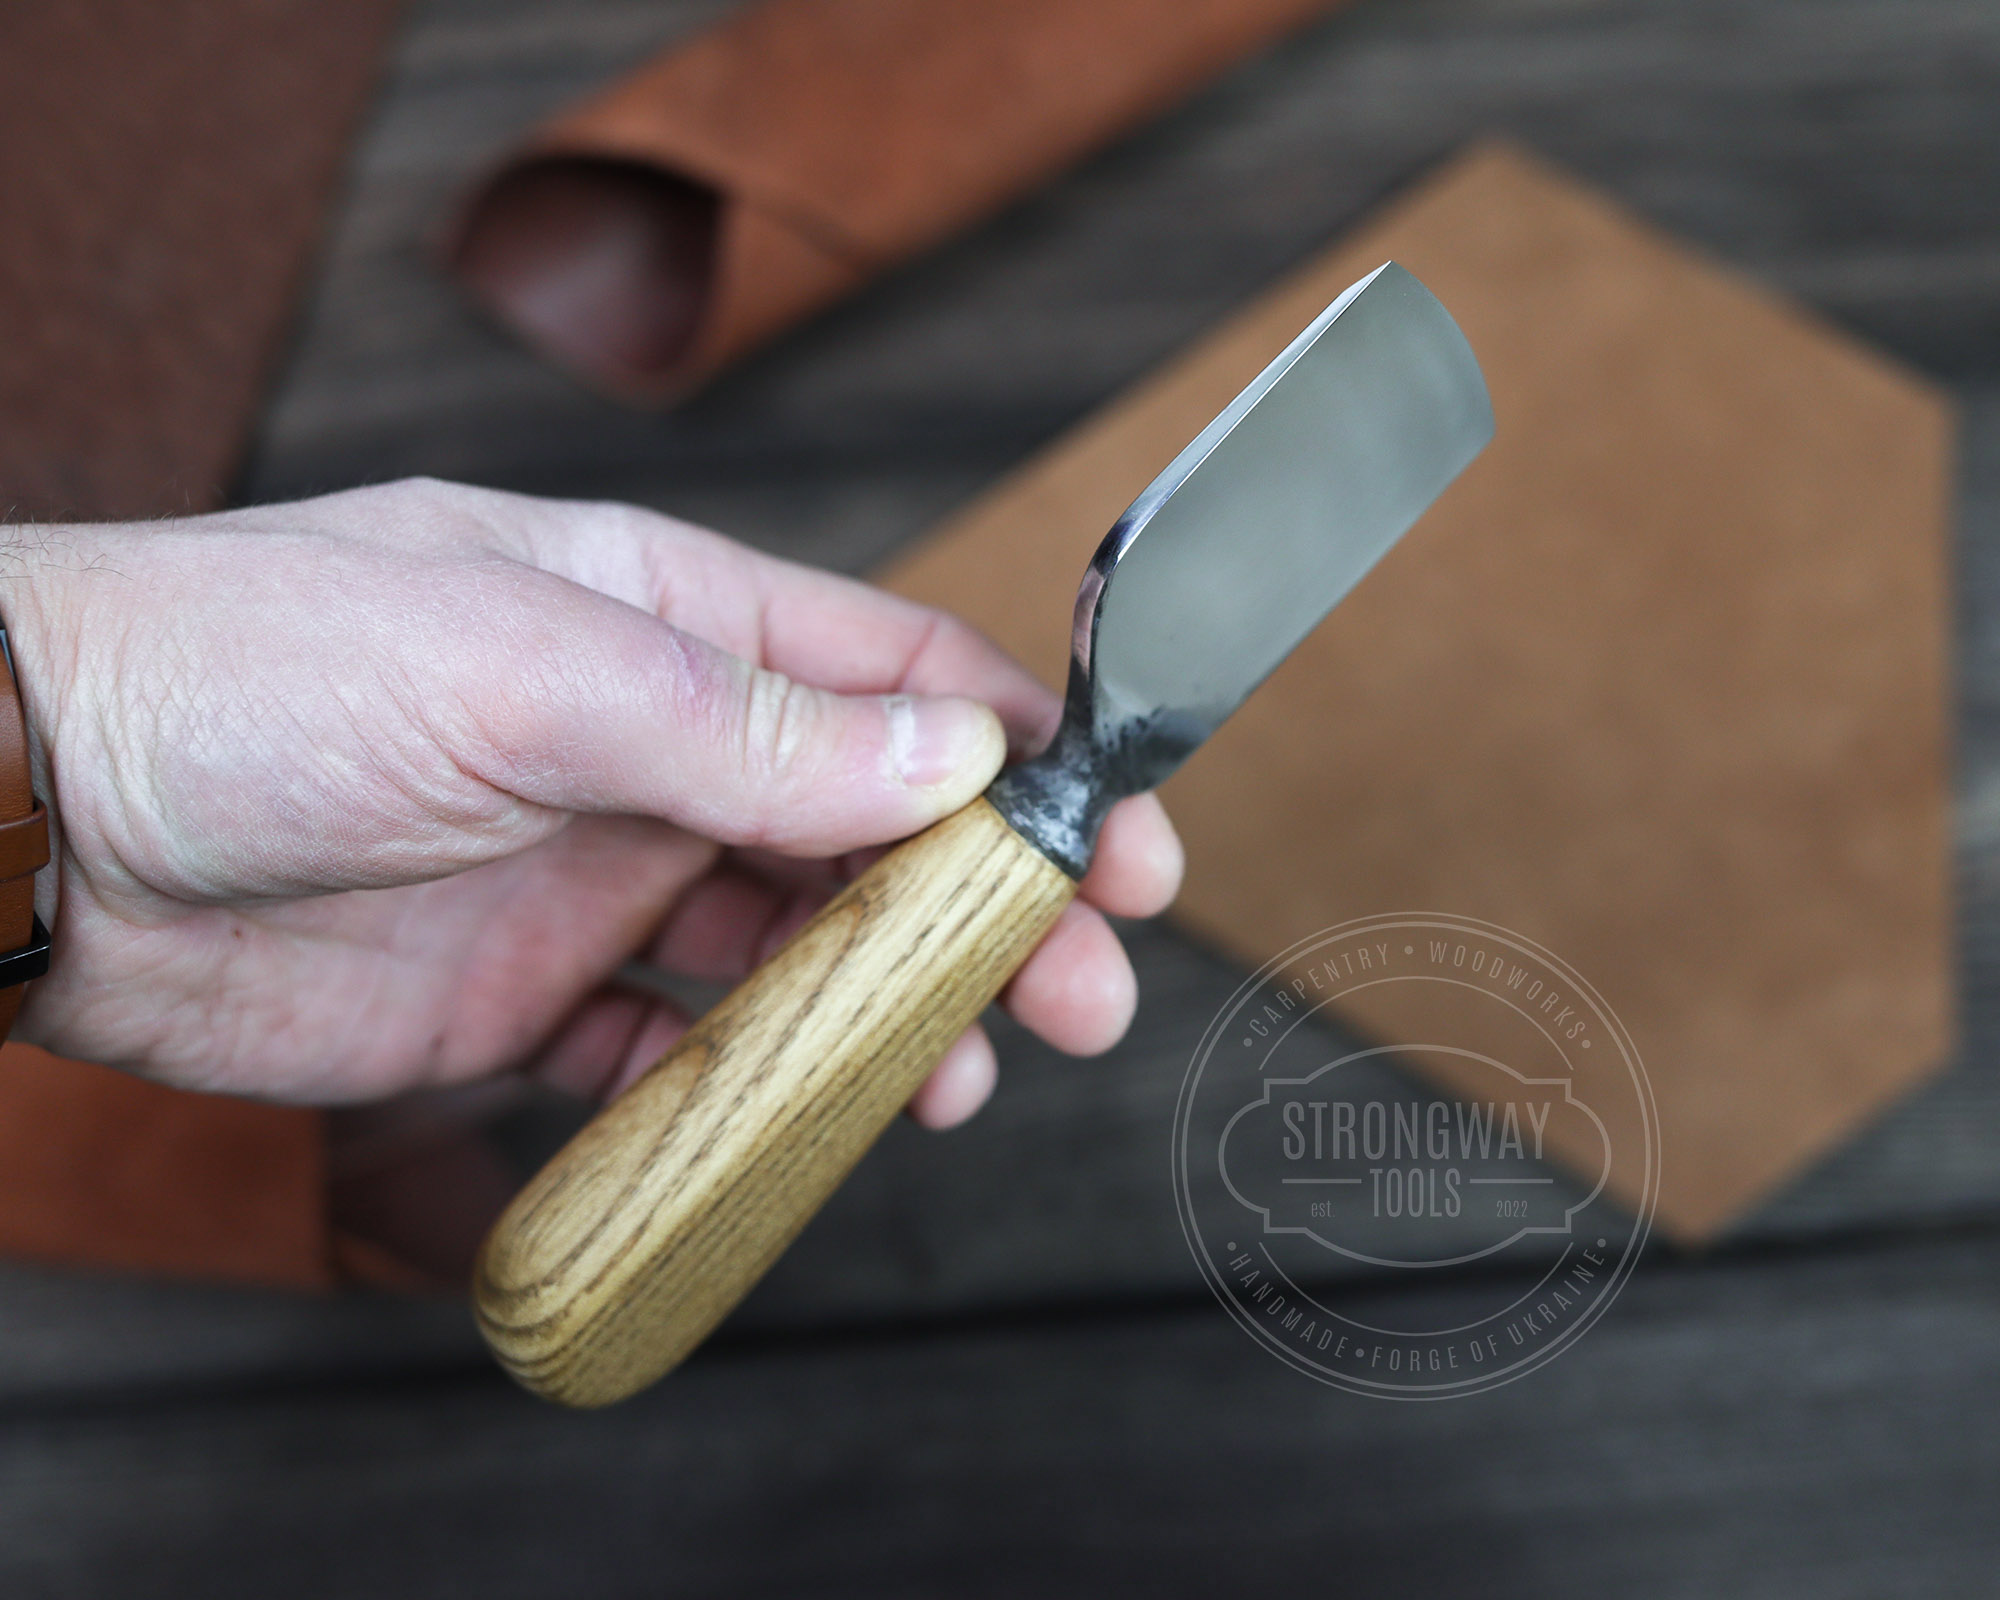 Round Point Skiving Knife: 7 Inch Blade